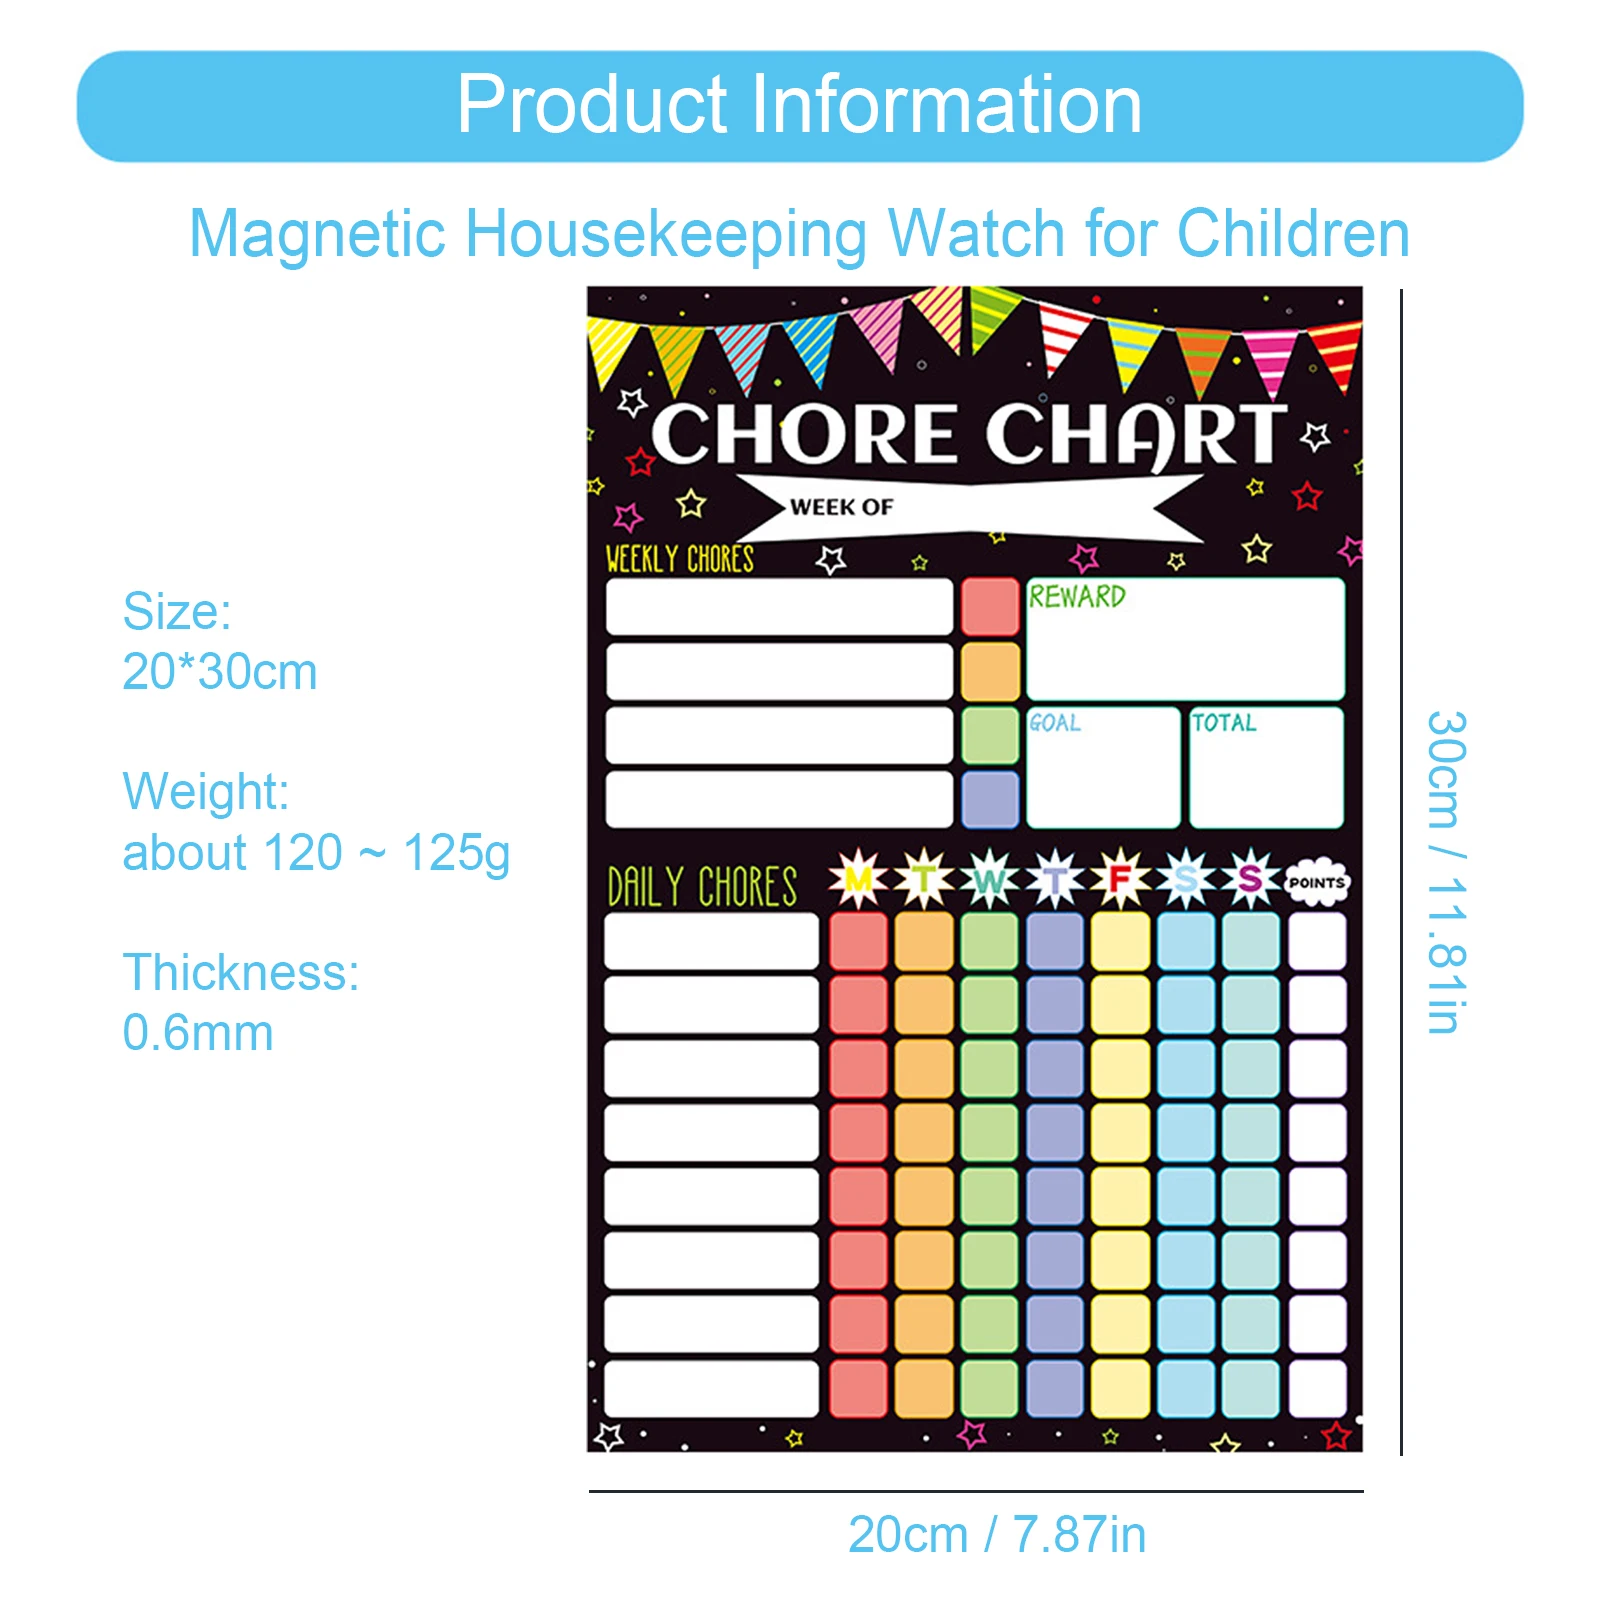 Magnetic Chore Chart Weekly Visual Schedule For Kids Magnetic Chore List Dry Erase Board Set With 2 Fine Tip Markers Reusable images - 6